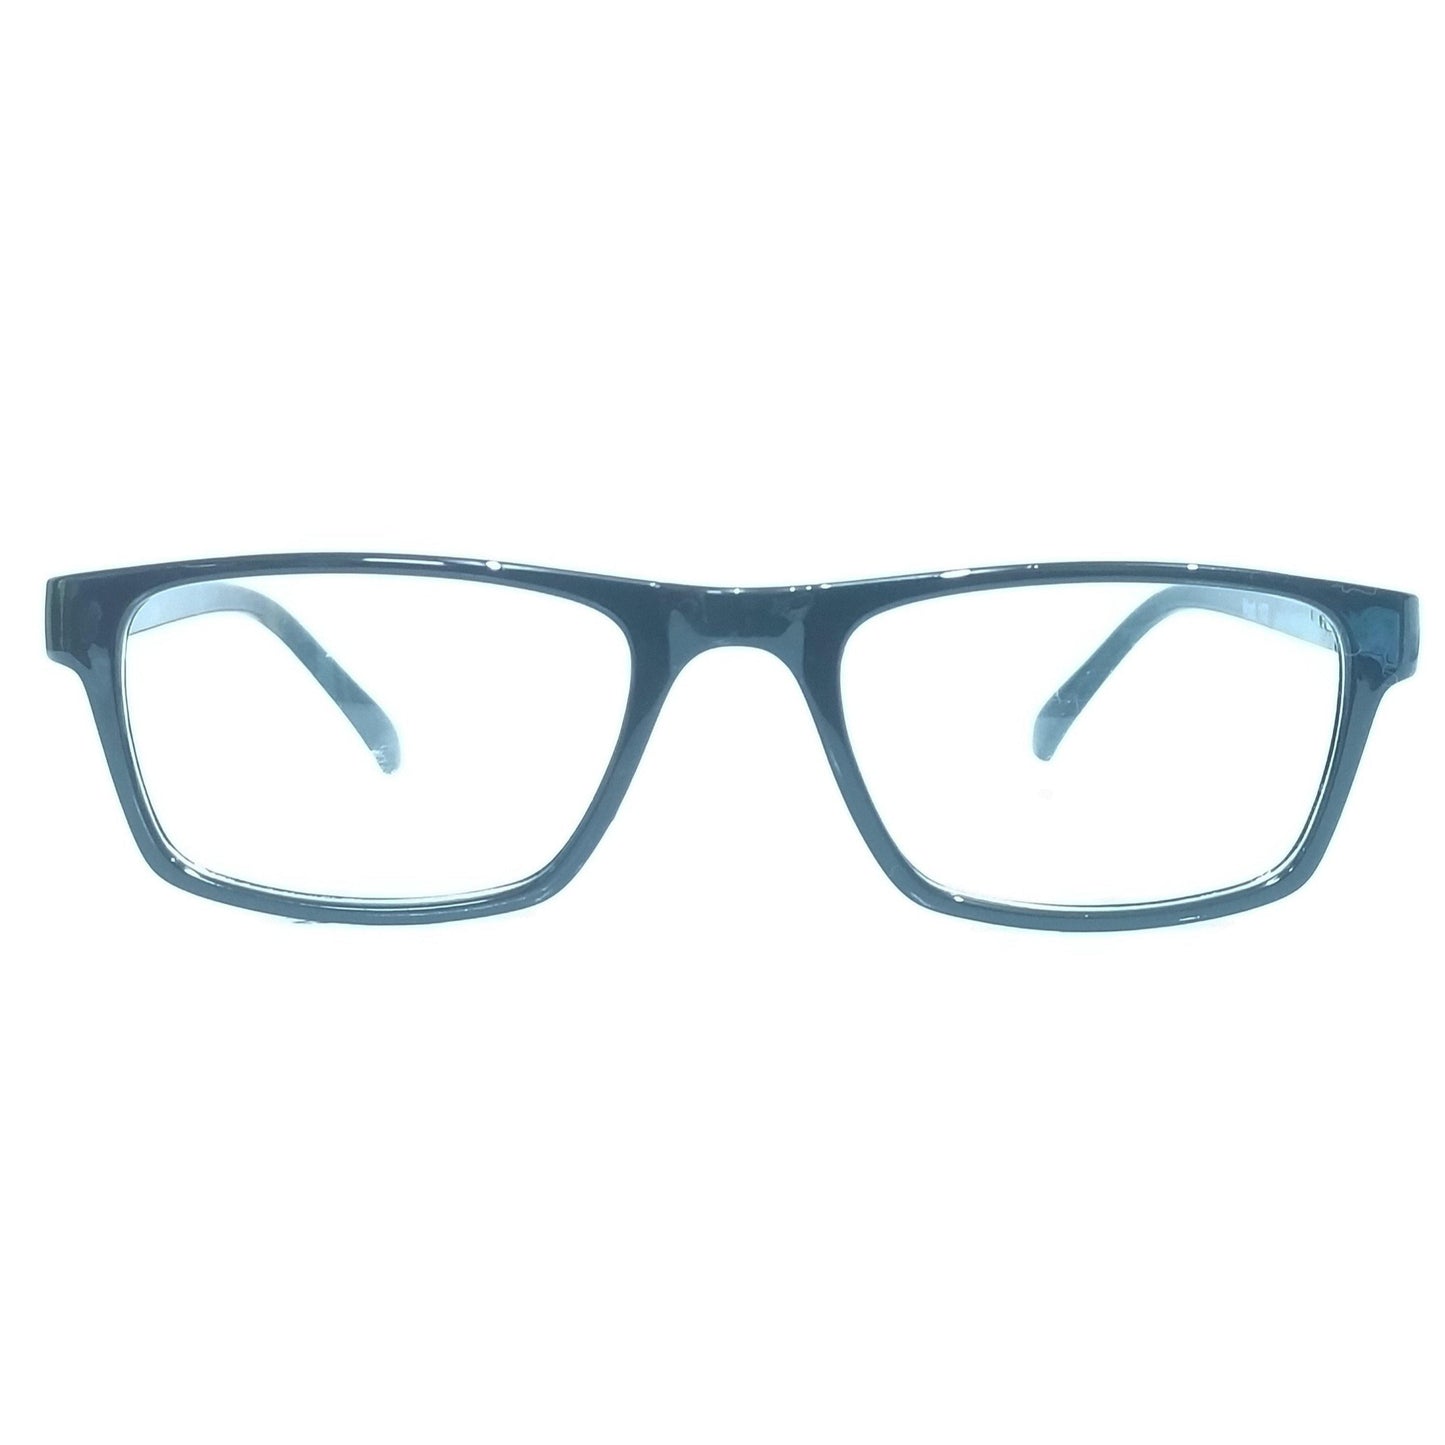 Buy Black Spectacle Frame Glasses for Teens - Glasses India Online in India